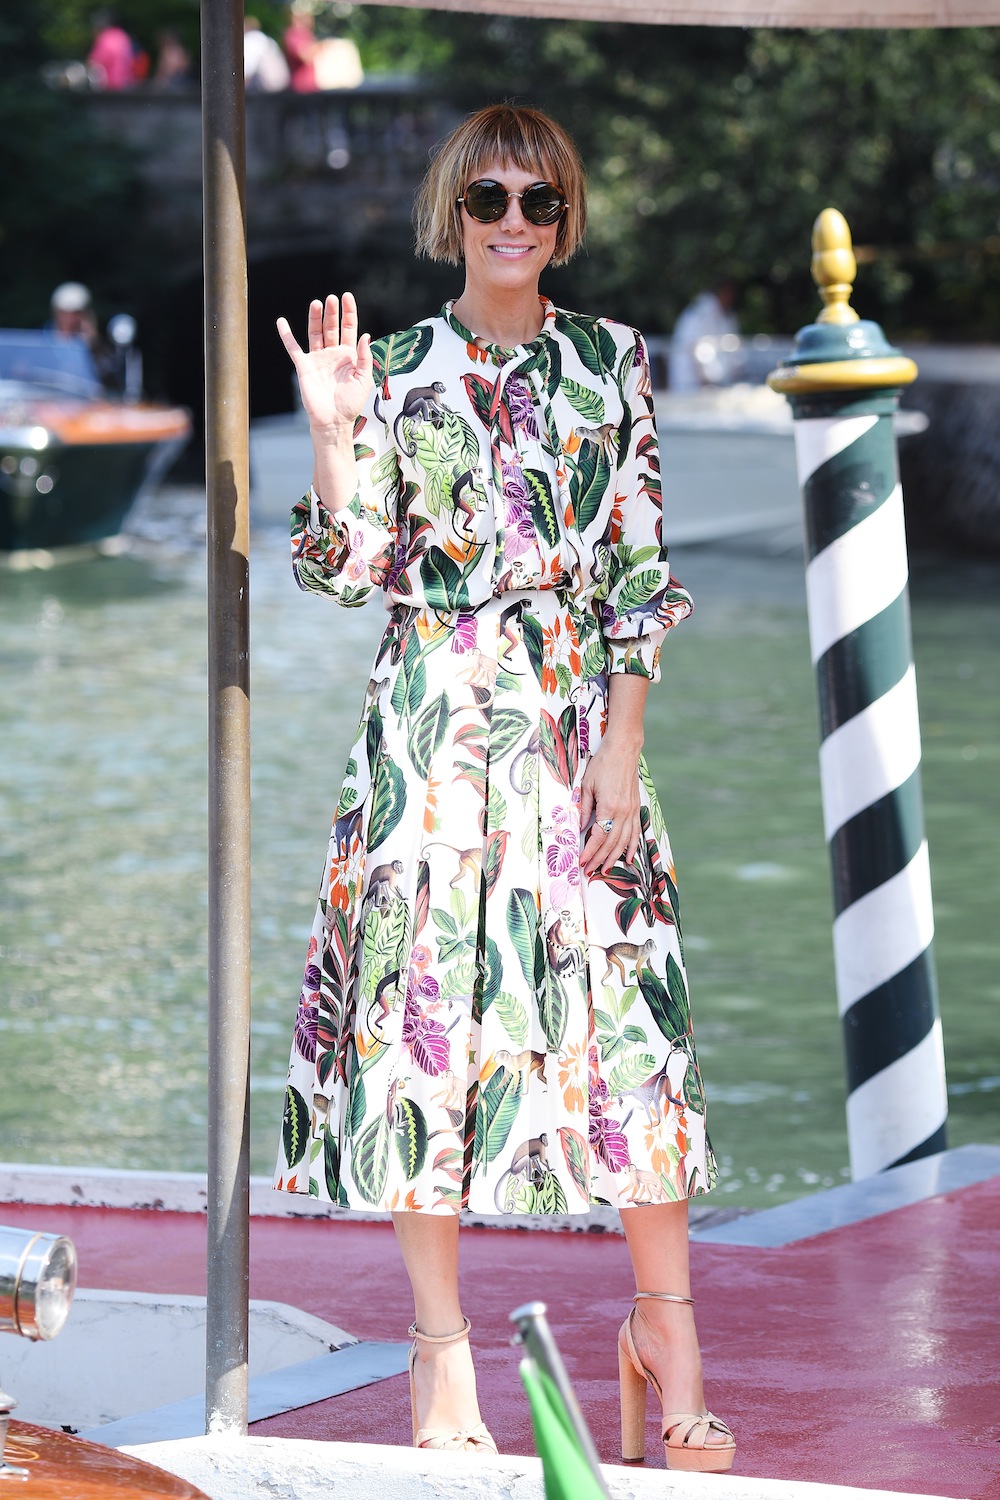 Kristen Wiig is seen during the 74th Venice Film Festival